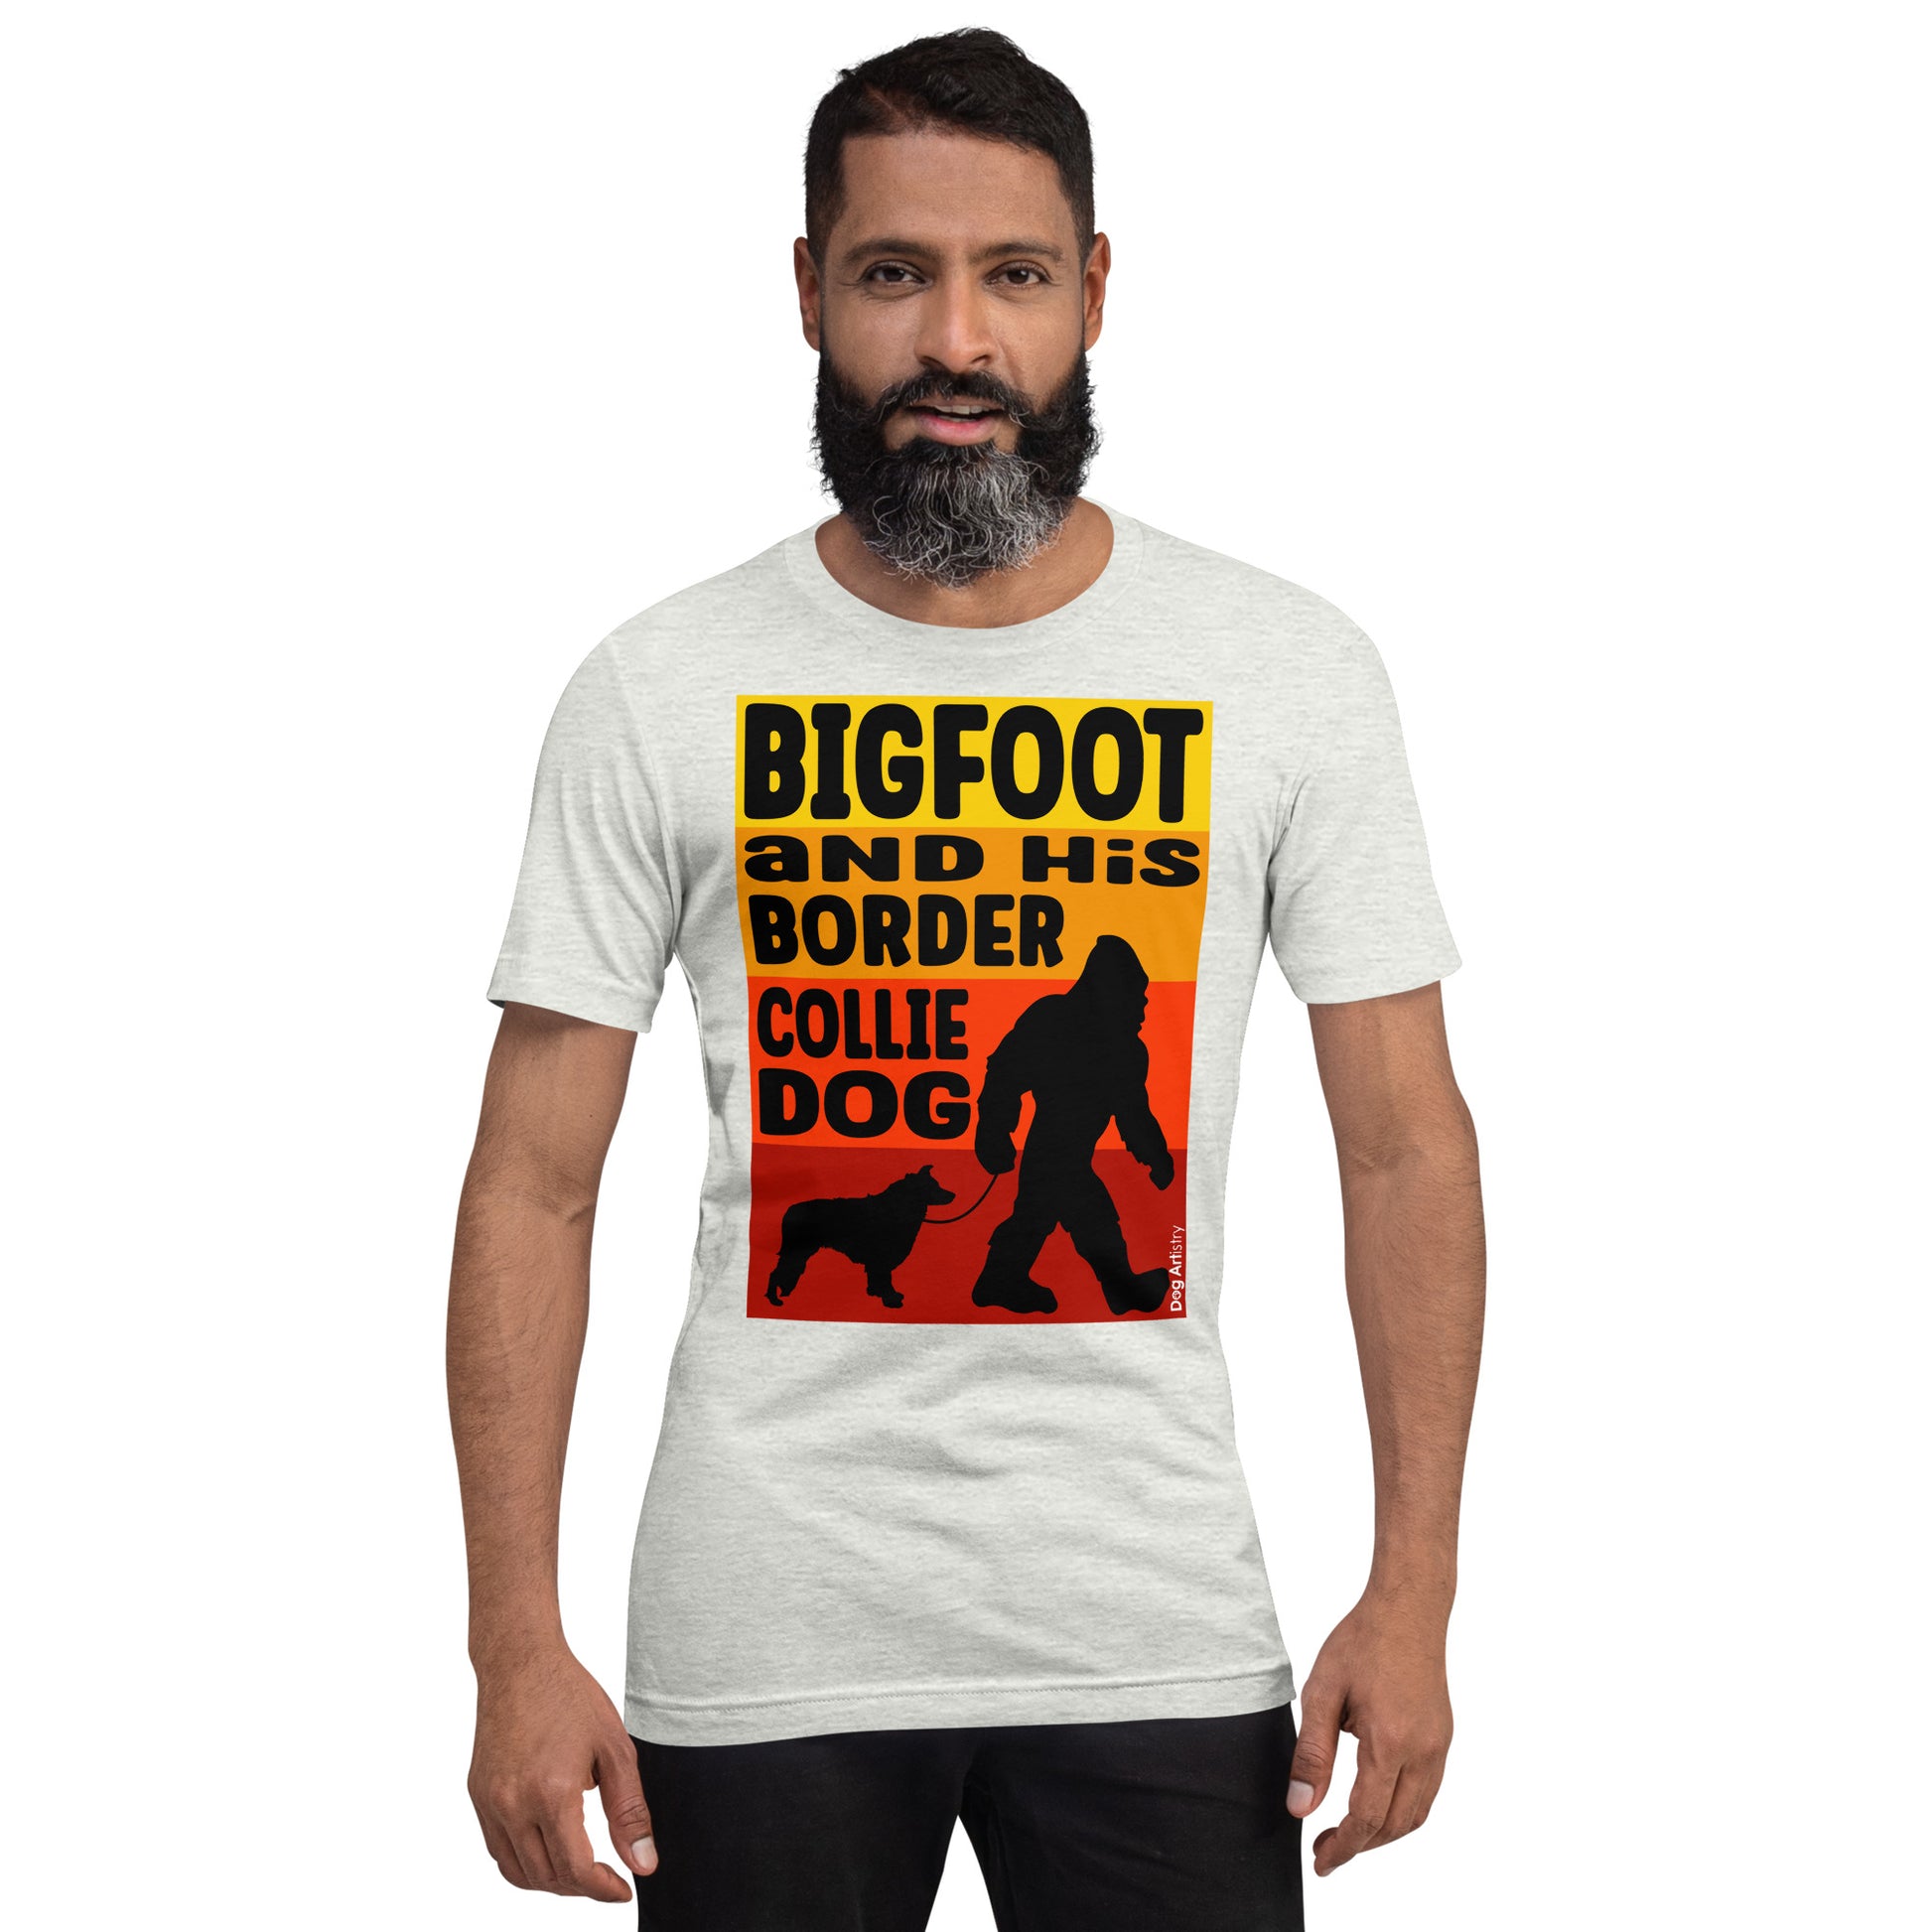 Big foot and his Border Collie unisex ash t-shirt by Dog Artistry.